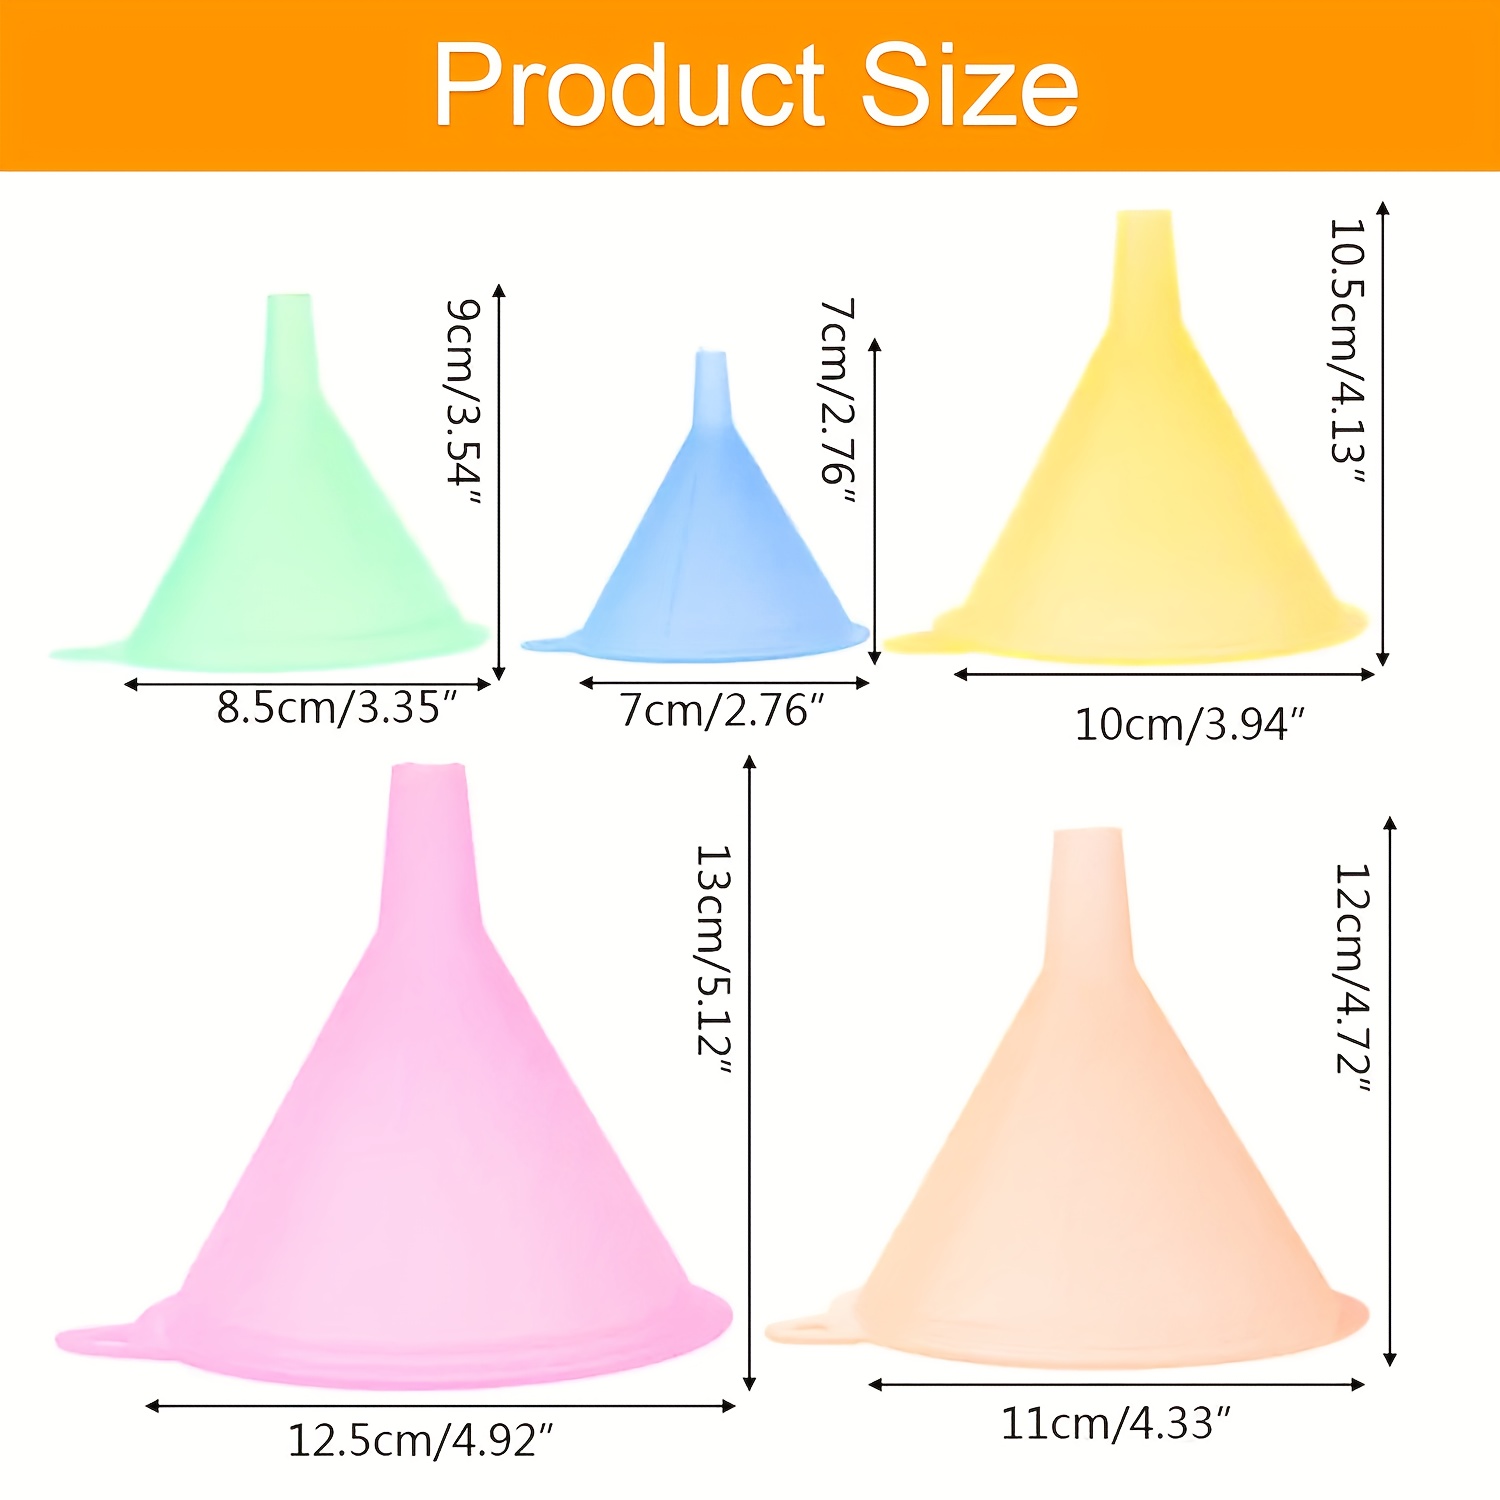  5 Pcs Funnel Water Bottle Filling Hopper Color Powder Kitchen  Supply Handle Small Powder Small Caliber Plastic : Home & Kitchen